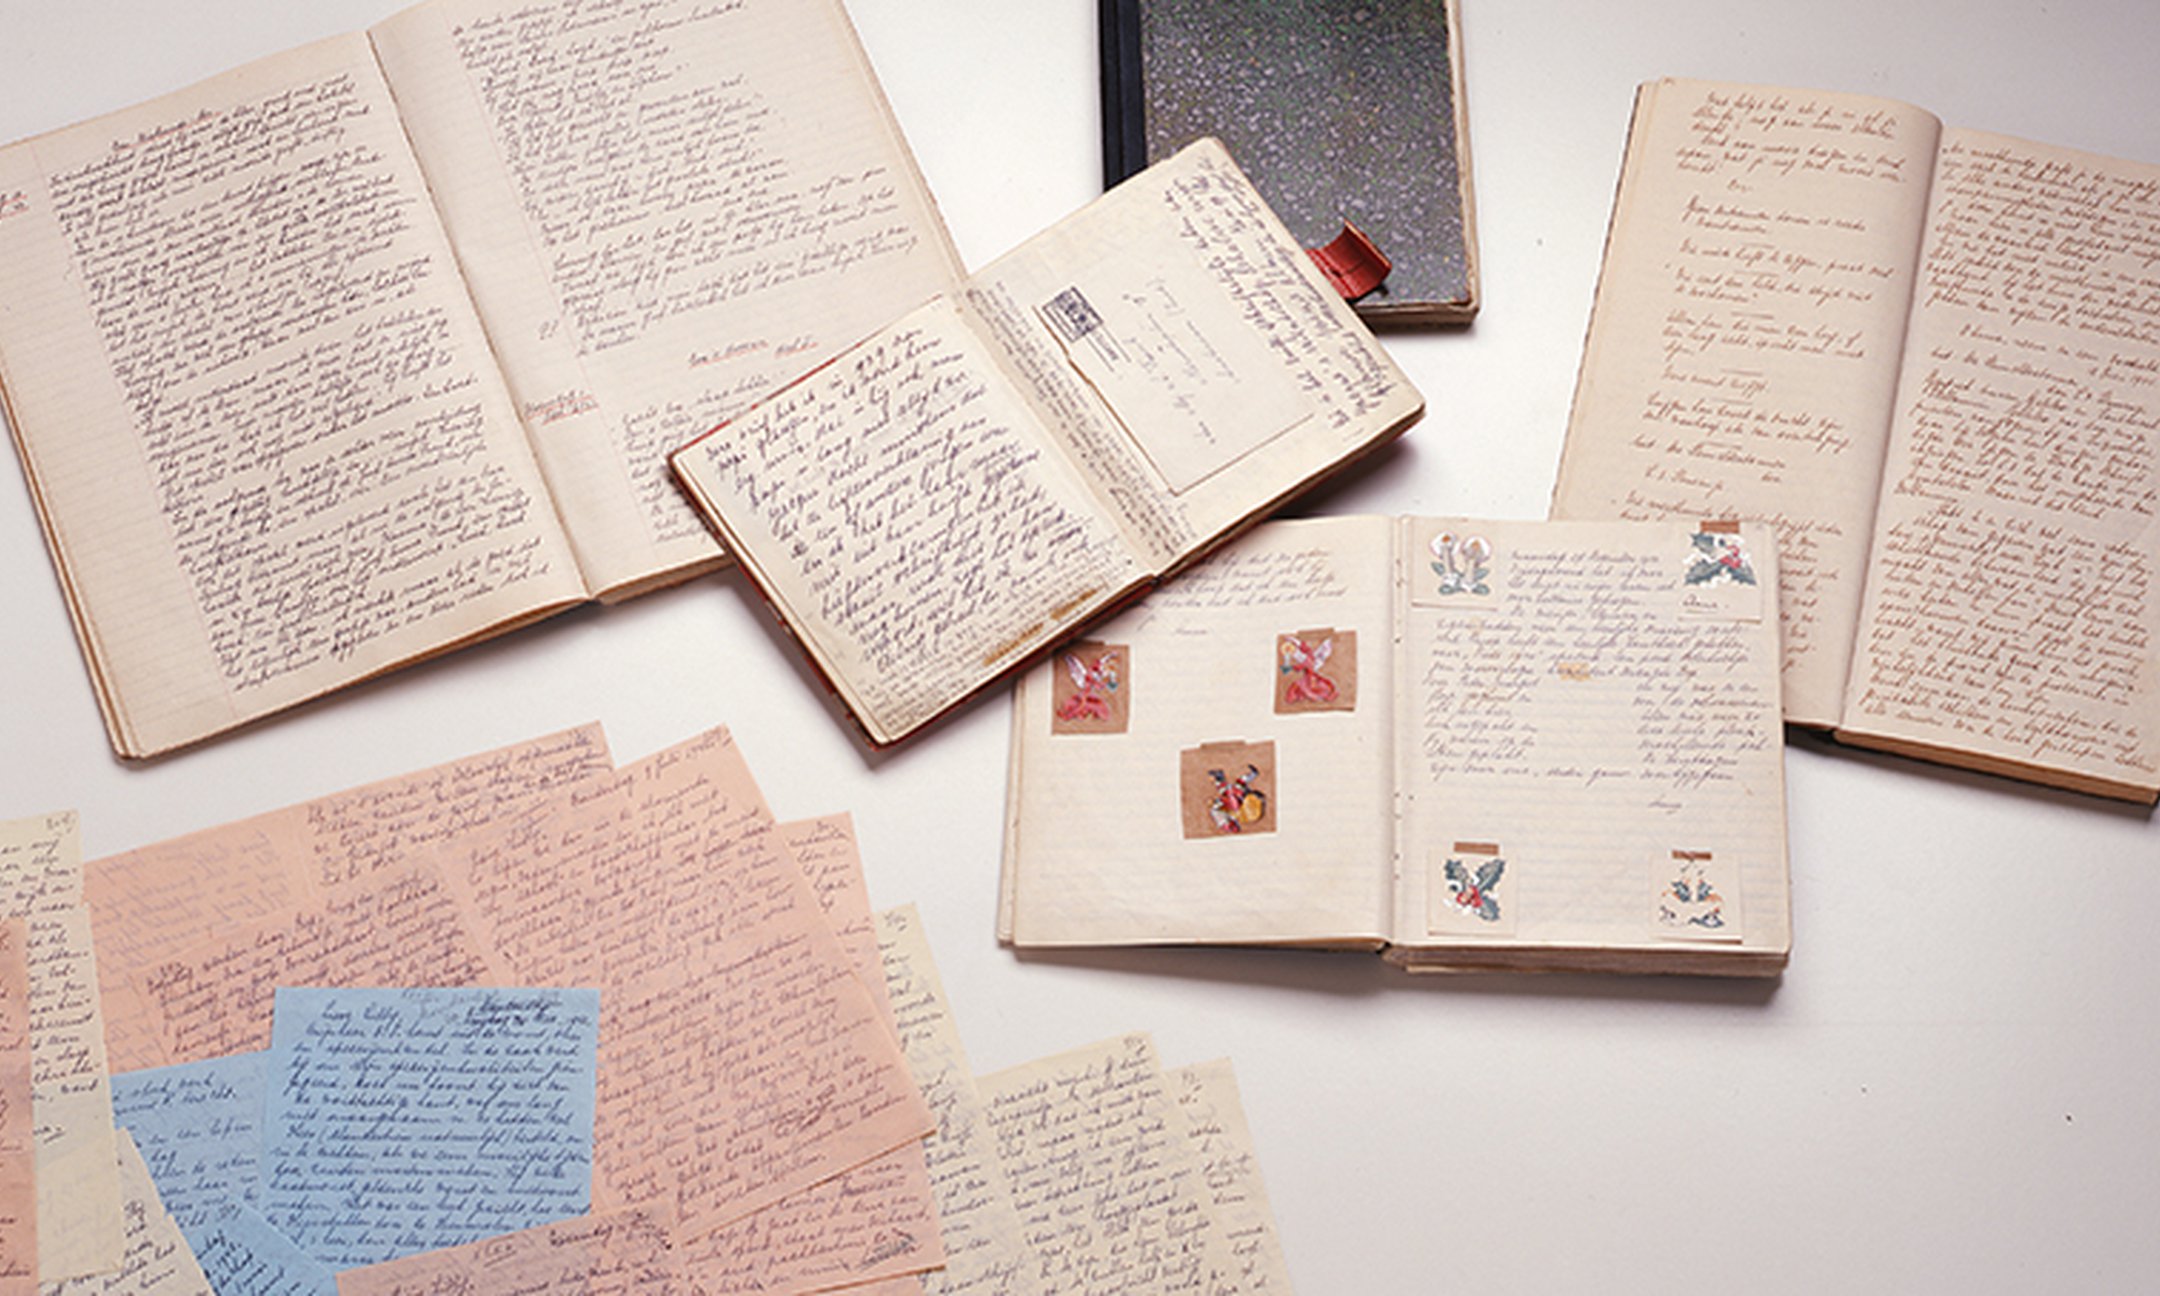 Original manuscripts by Anne Frank, with the diary, the loose sheets and the exercise books with short stories and beautiful sentences.